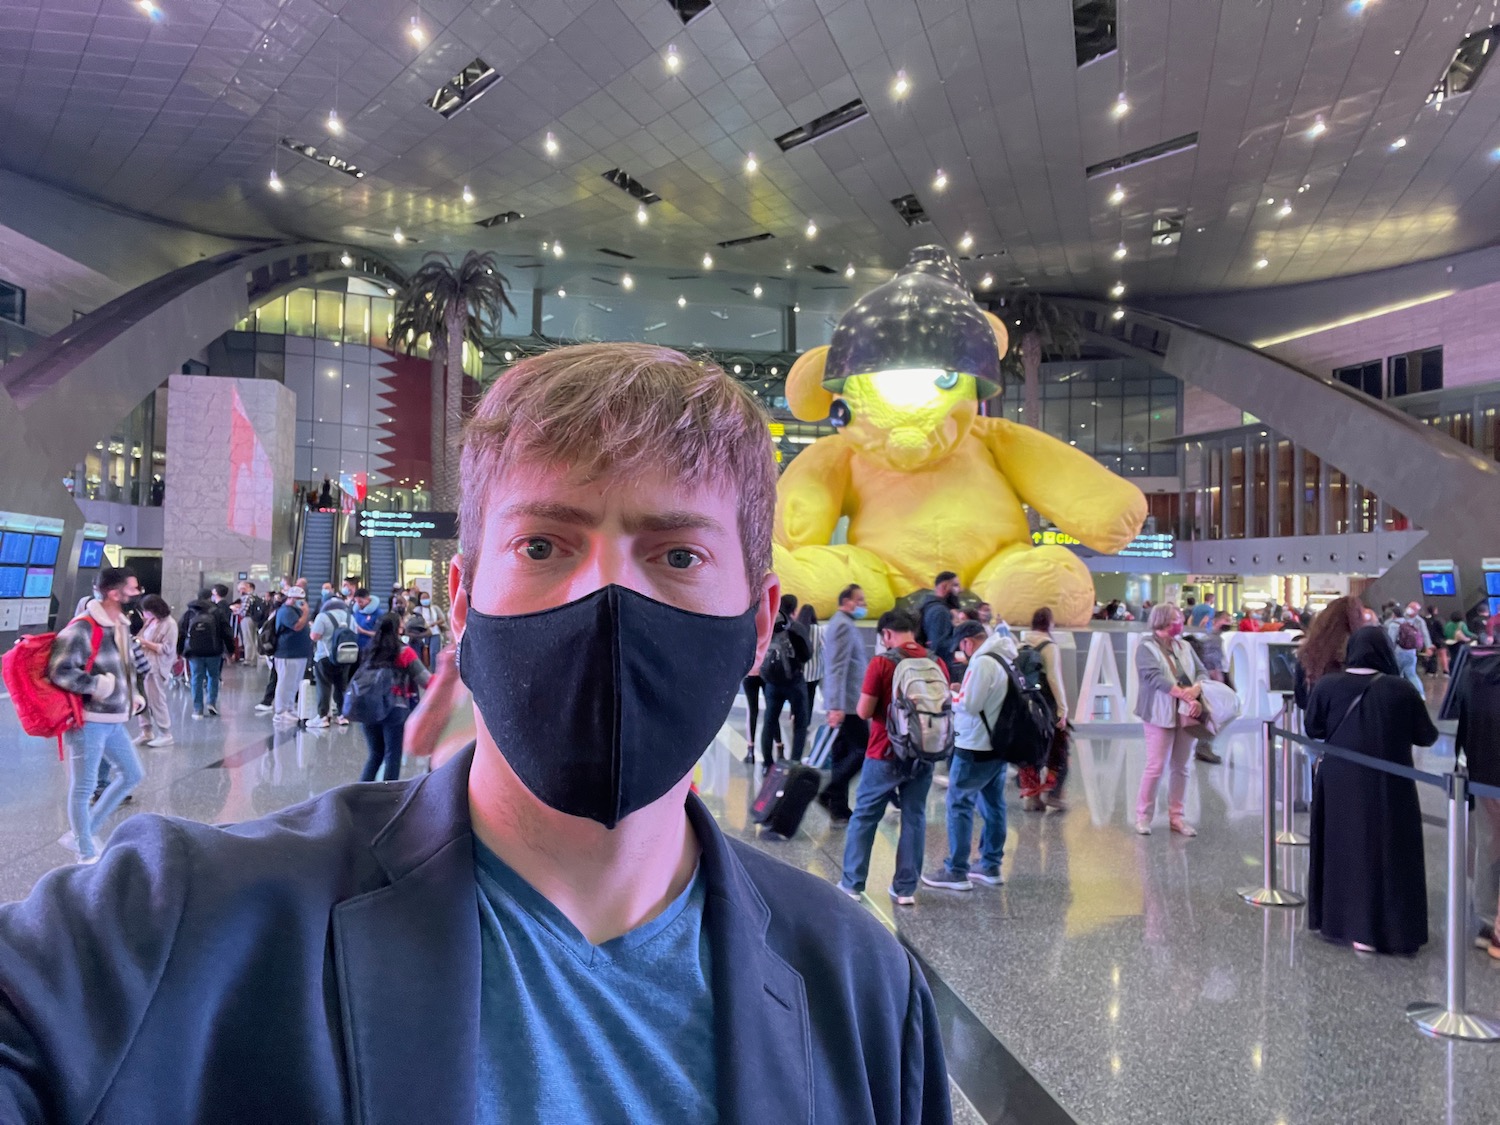 a man taking a selfie in a large building with a large yellow stuffed bear